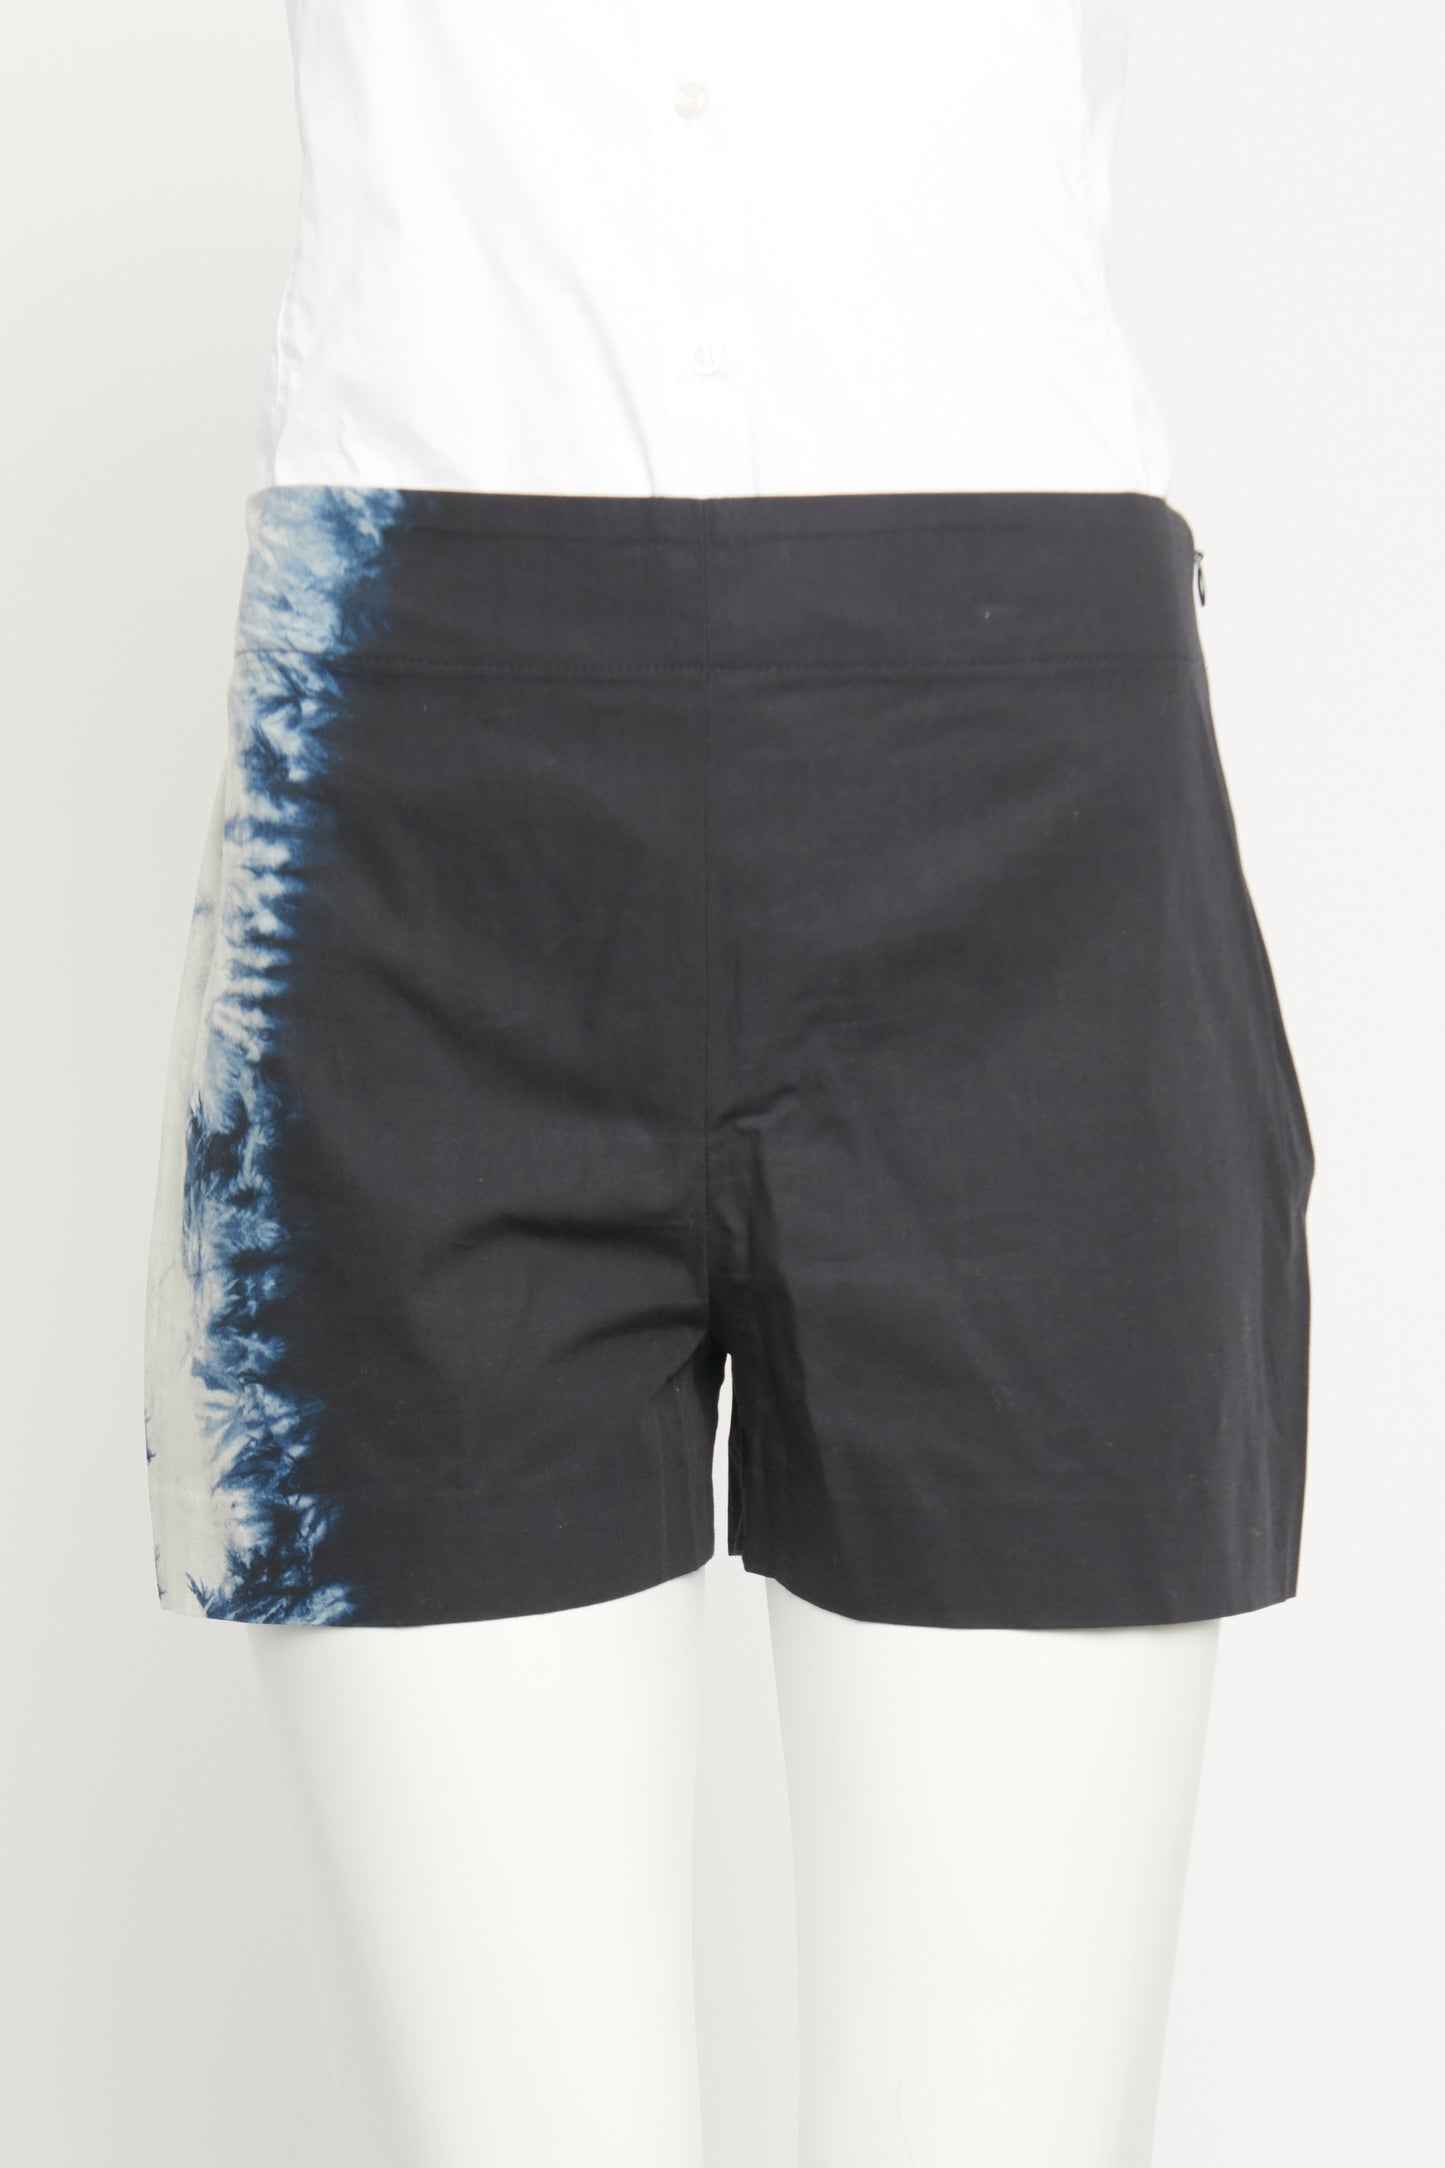 2020 Navy Cotton Tie Dye Preowned Shorts